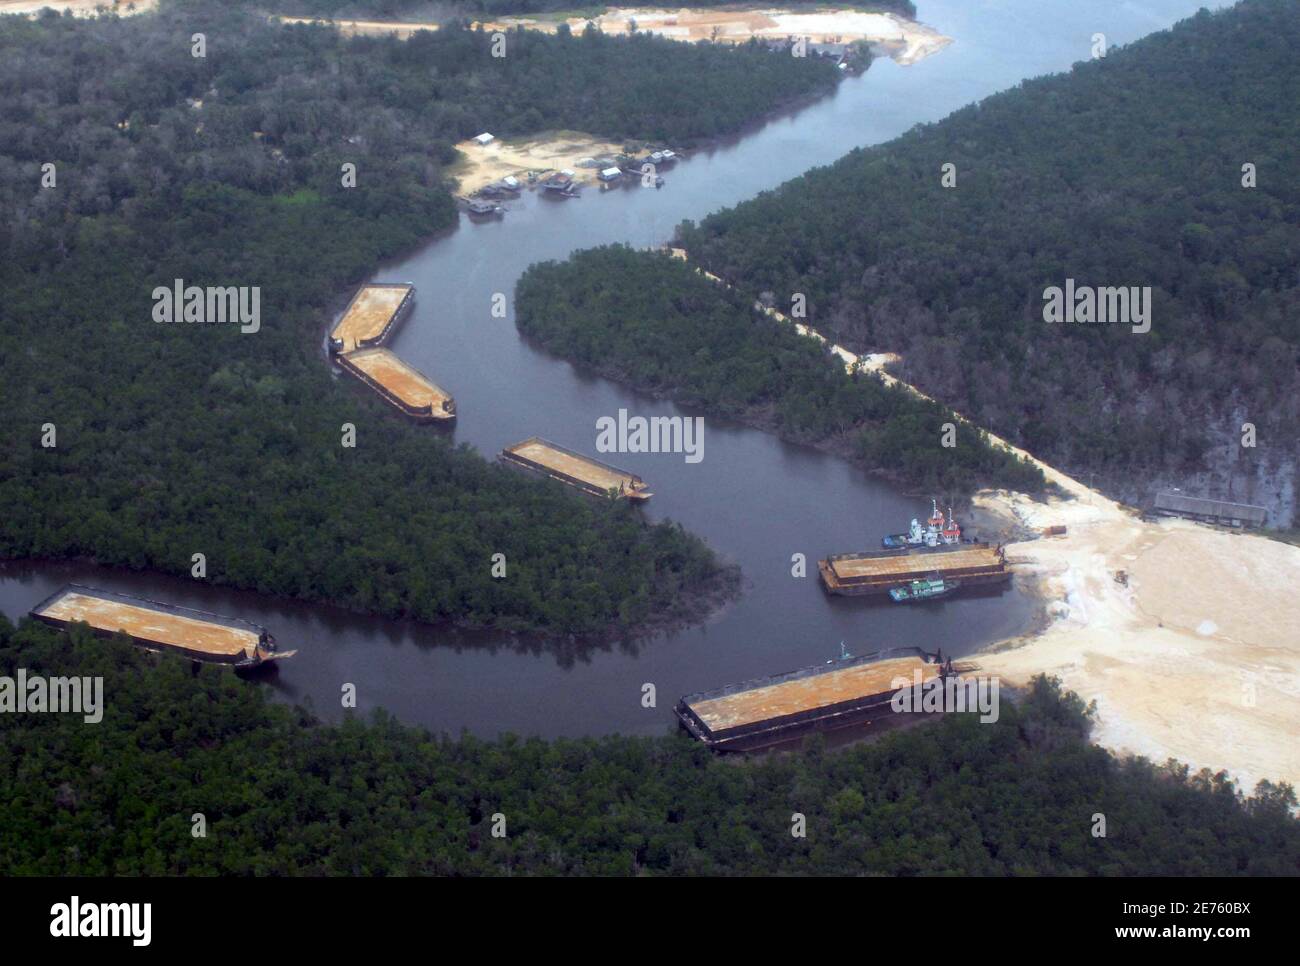 An aerial view shows barges lining up to wait to load sand, to be exported to Singapore, from a sand mine at Indonesia's Bintan island February 24, 2007. Indonesia has said it will stop the mining, which it blames for wiping out some of its islands off the map. The country has about 17,000 islands, but is not completely sure how many and has no official names for more than half. It plans to complete this year a survey to help manage them, particularly given concerns over rising sea levels due to climate change and sovereignty disputes.  To match feature INDONESIA ISLANDS. REUTERS/Yuli Seperi   Stock Photo